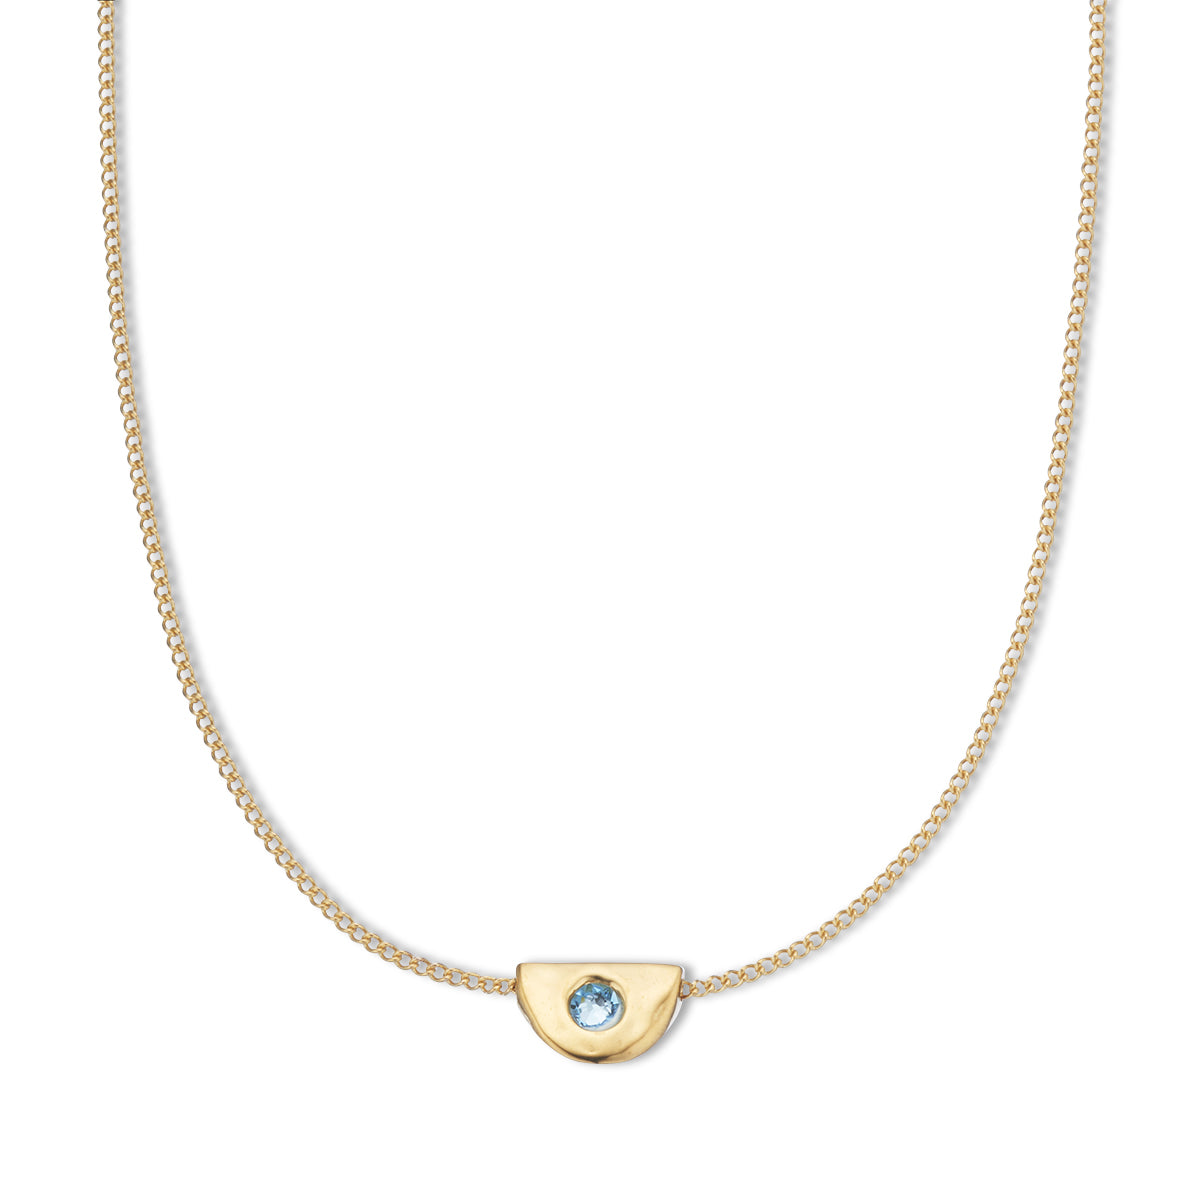 March aquamarine birthstone necklace 18k gold plated